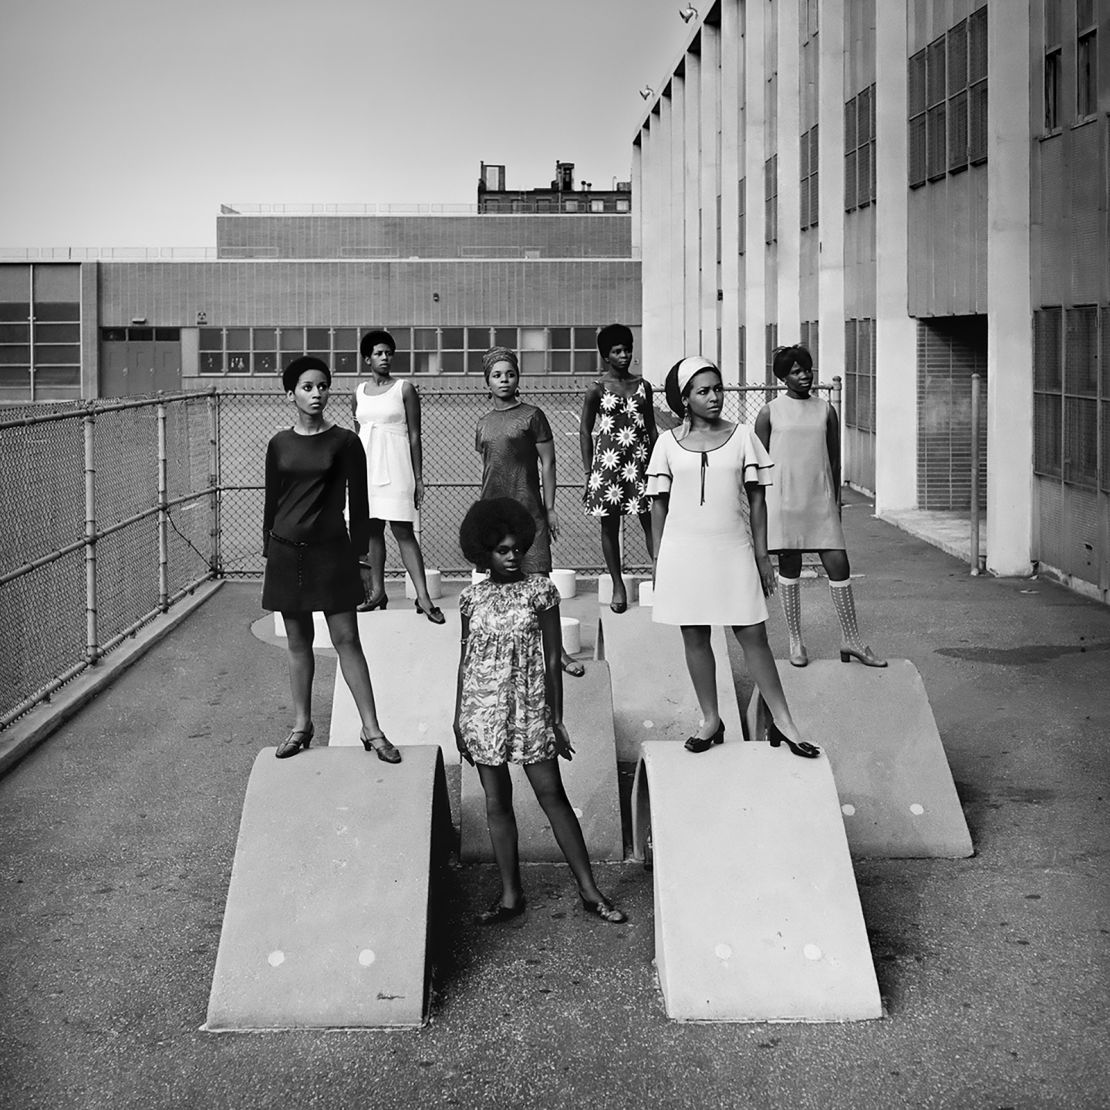 Brathwaite's photograph of models embracing their natural hair, taken in 1966.